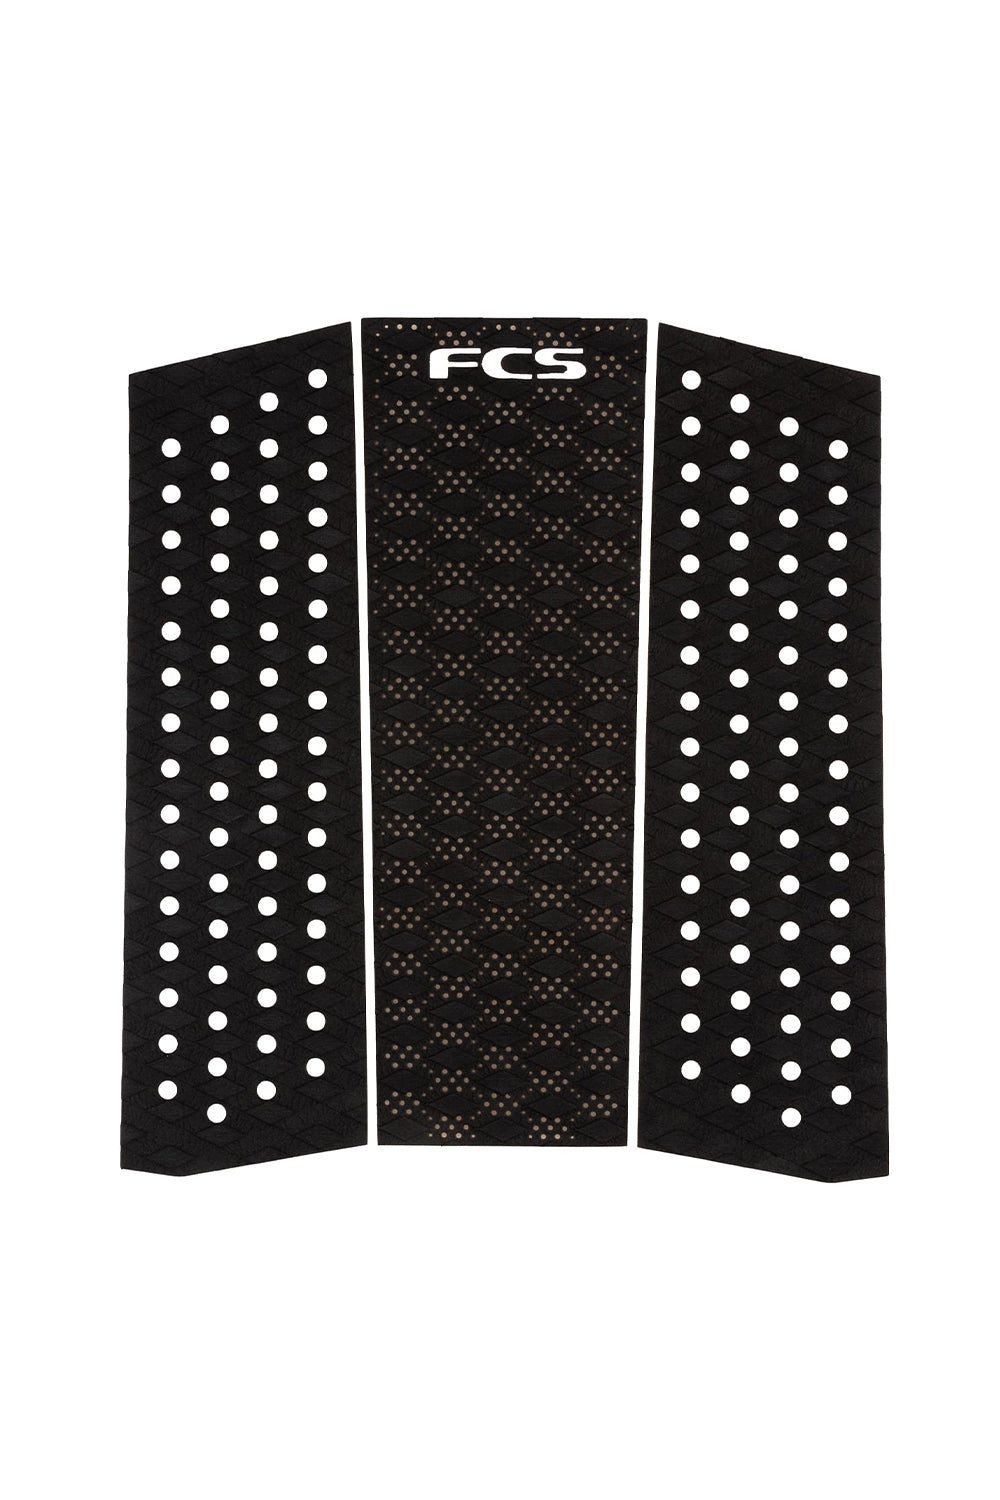 FCS T3 Mid Traction